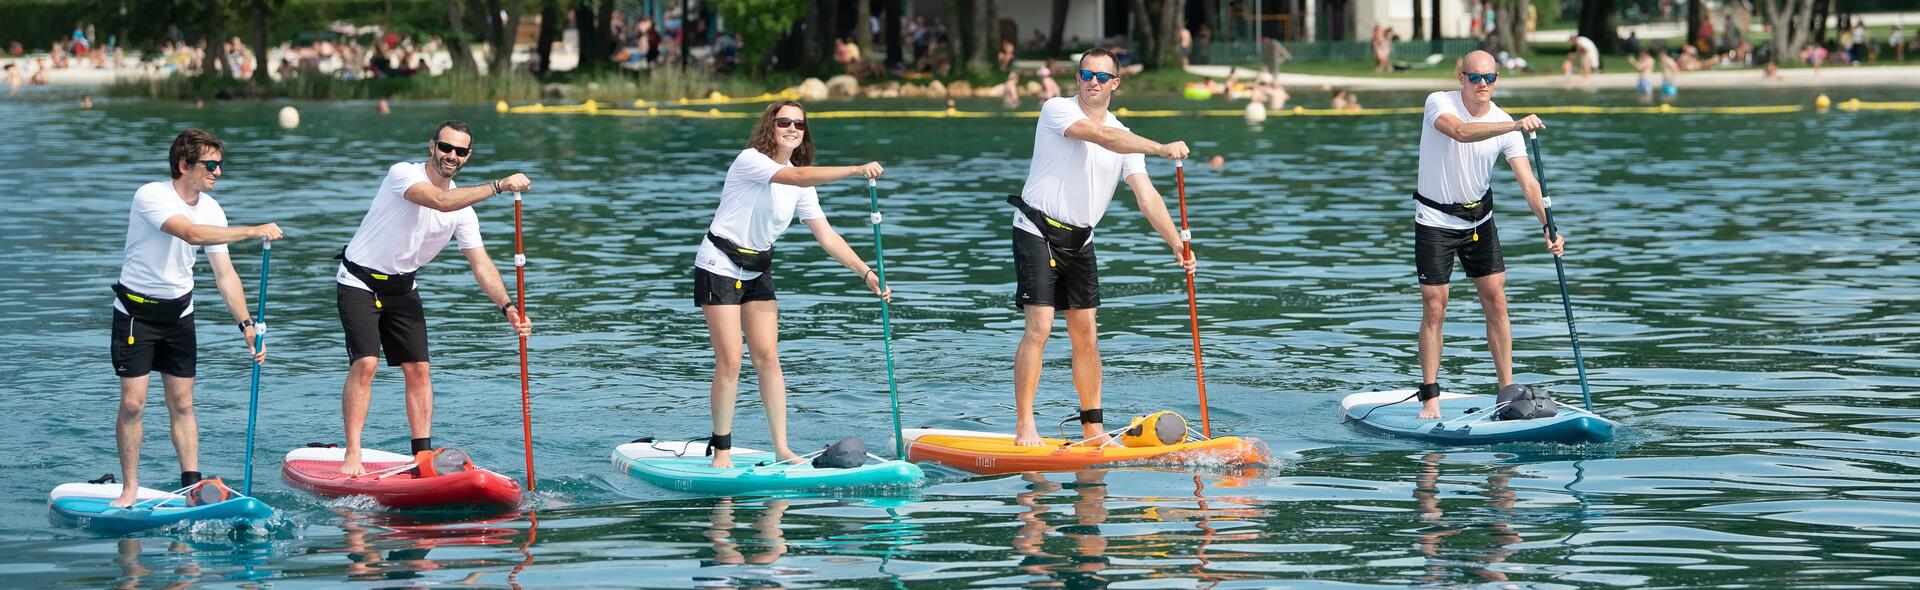 How to choose inflatable or rigid stand-up paddle board